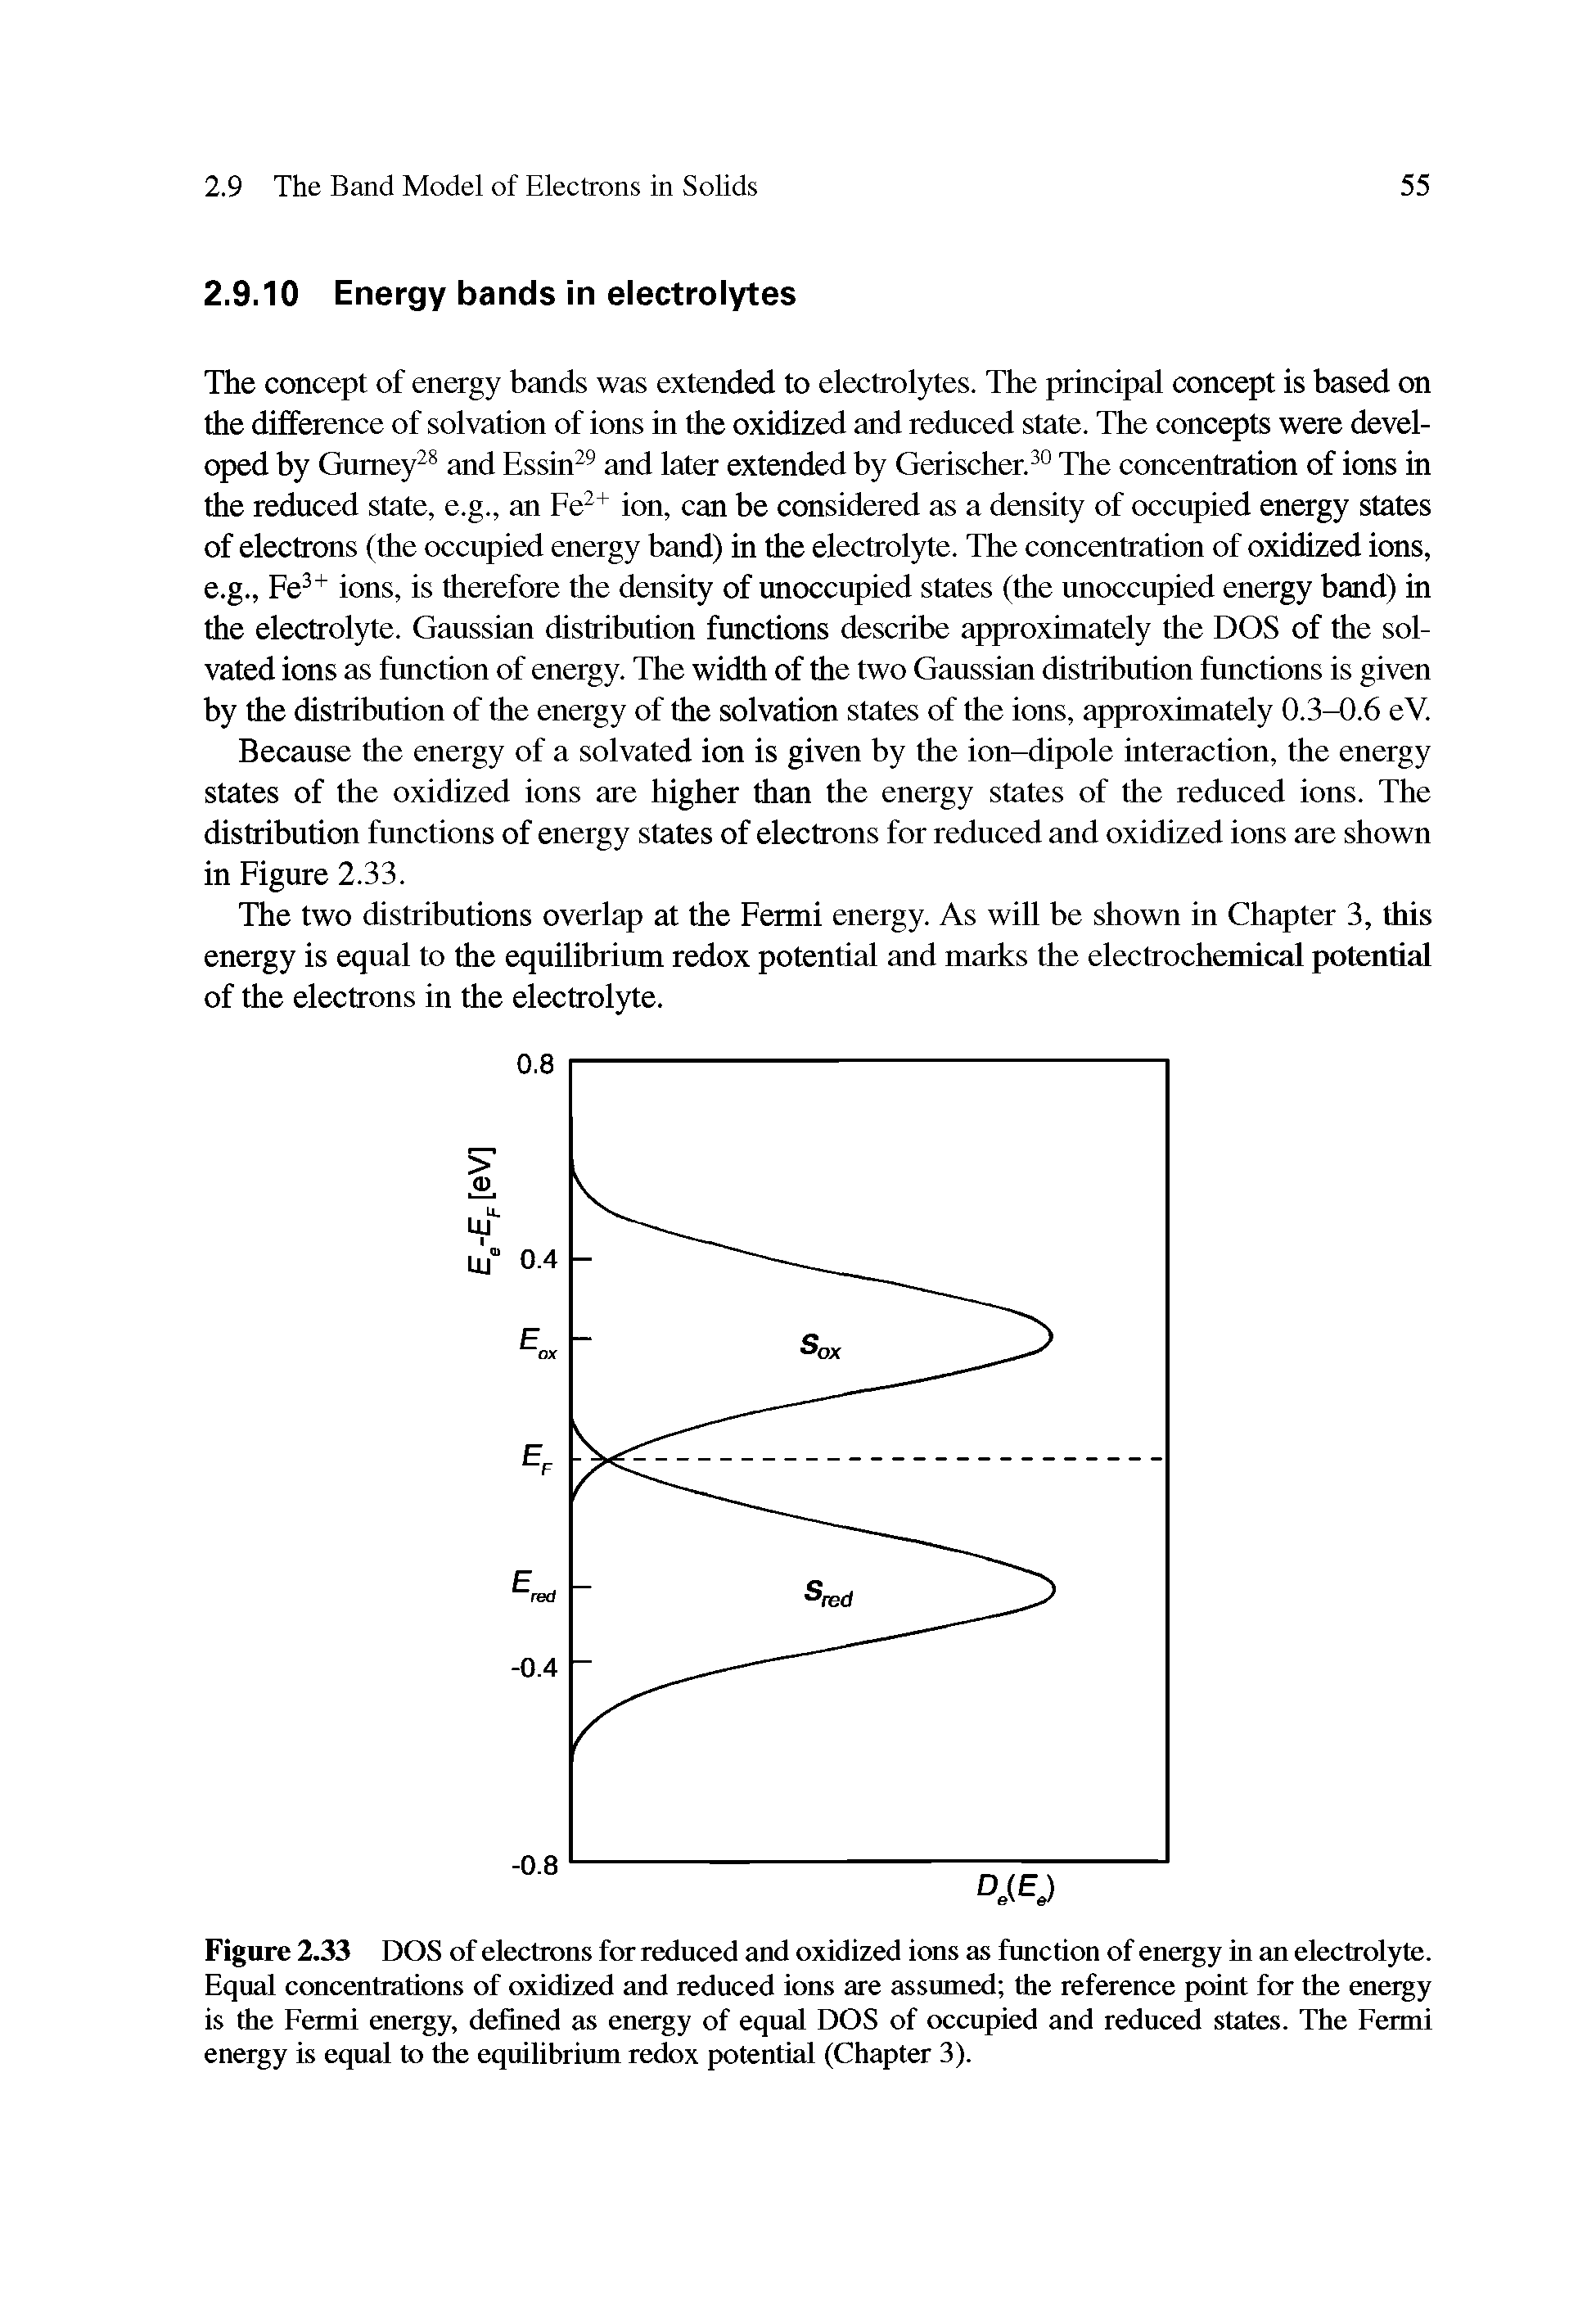 Figure 2.33 DOS of elections for reduced and oxidized ions as function of energy in an electrol)de. Equal concentrations of oxidized and reduced ions are assumed the reference point for the energy is the Fermi energy, defined as energy of equal DOS of occupied and reduced states. The Fermi energy is equal to the equilibrium redox potential (Chapter 3).